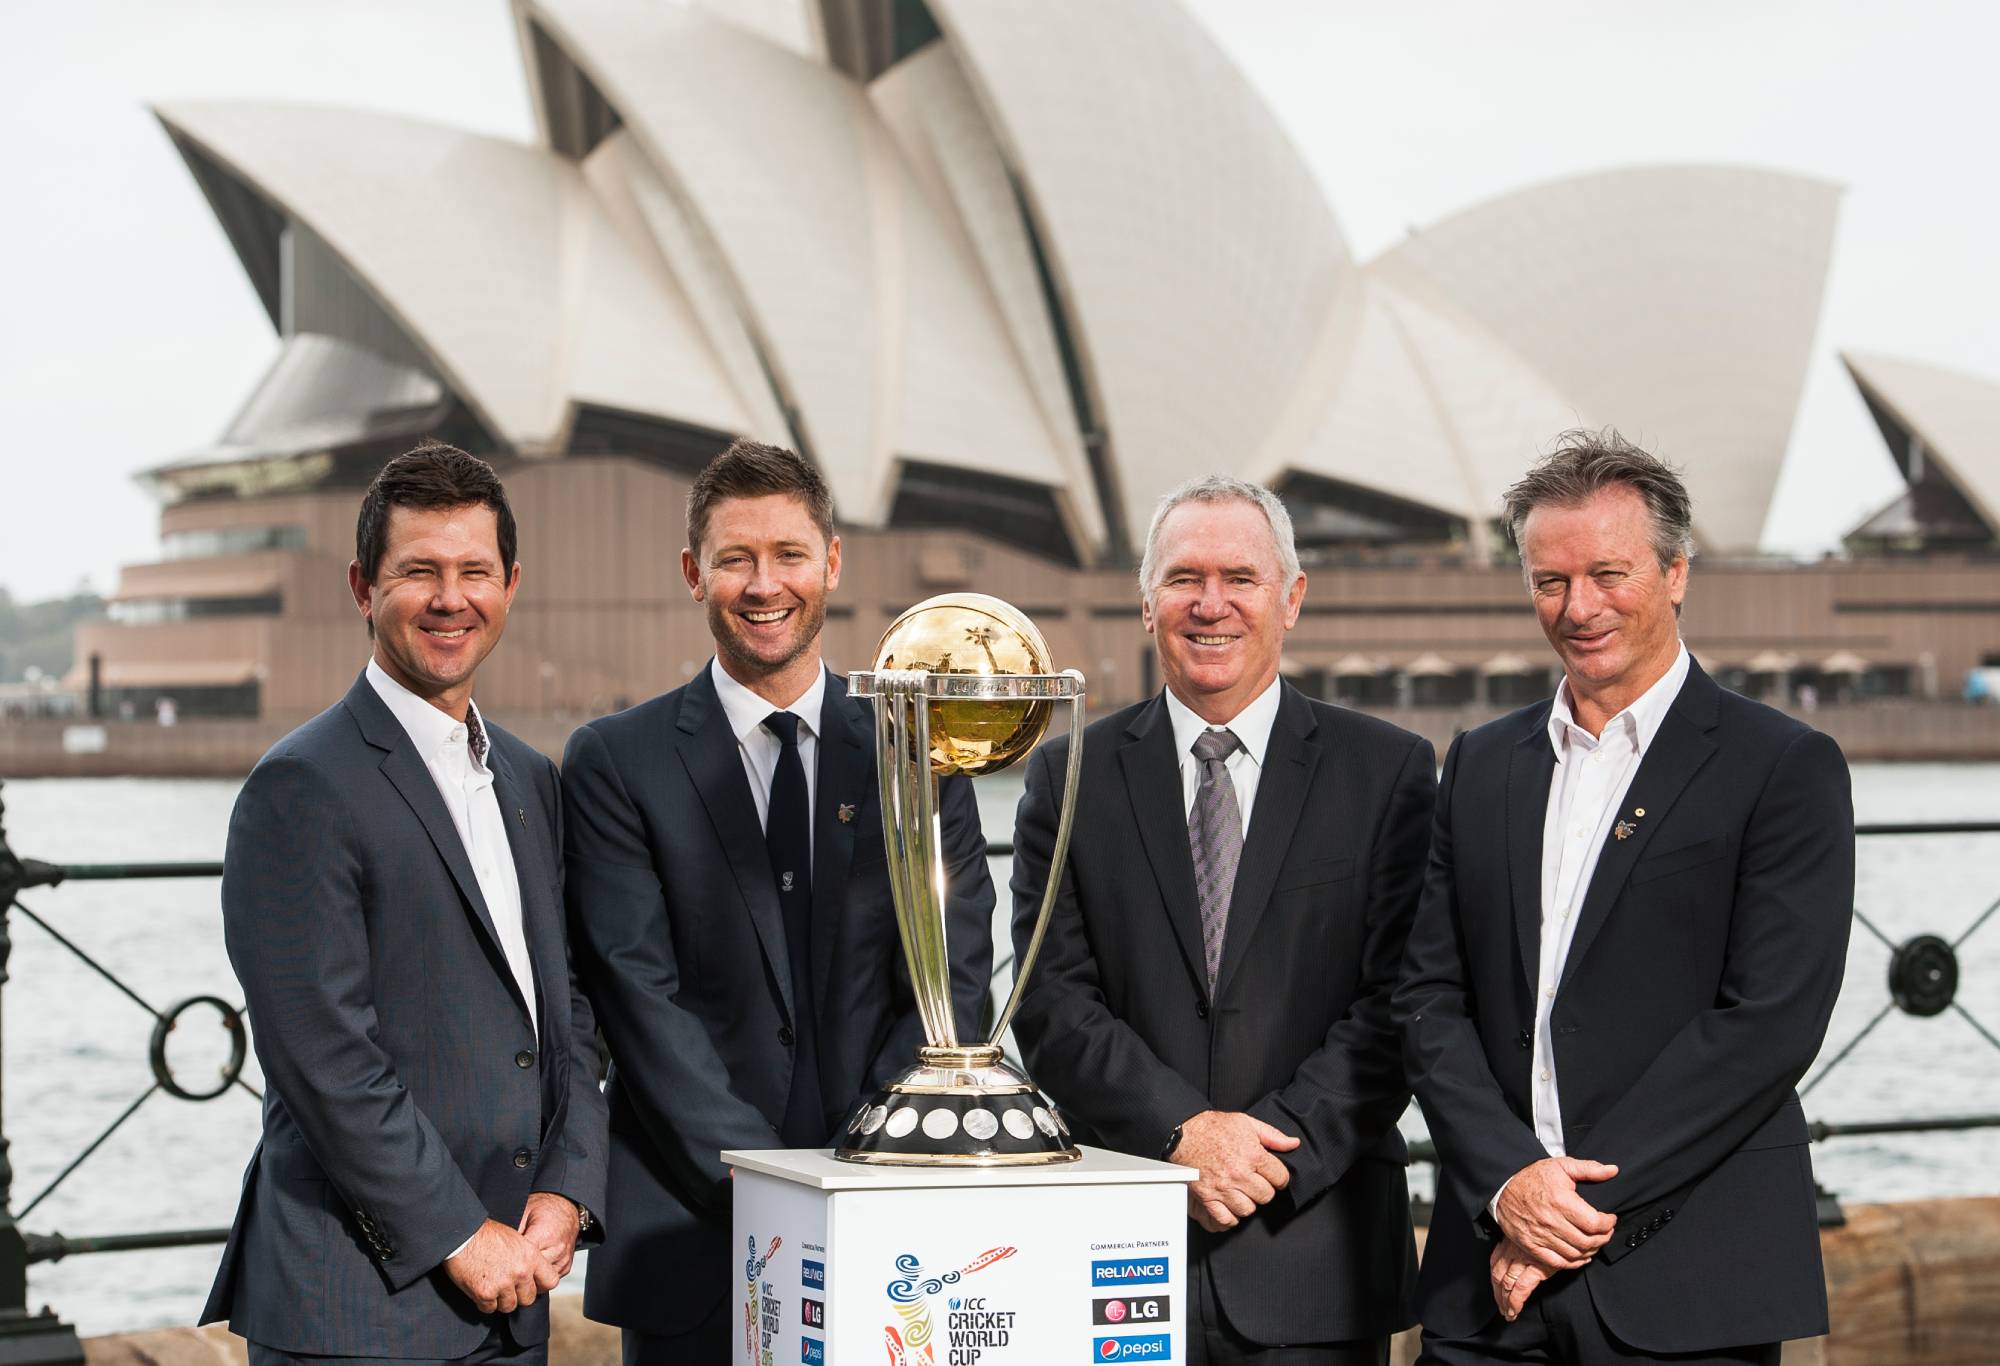 SYDNEY, AUSTRALIA - NOVEMBER 06: (L-R) Ricky Ponting, Michael Clarke, Allan Border and Steve Waugh pose for a photo with the ICC Cricket World Cup Trophy during the ICC 2015 Cricket World Cup 100 days to go announcement on November 6, 2014 in Sydney, Australia. (Photo by Brett Hemmings/Getty Images)